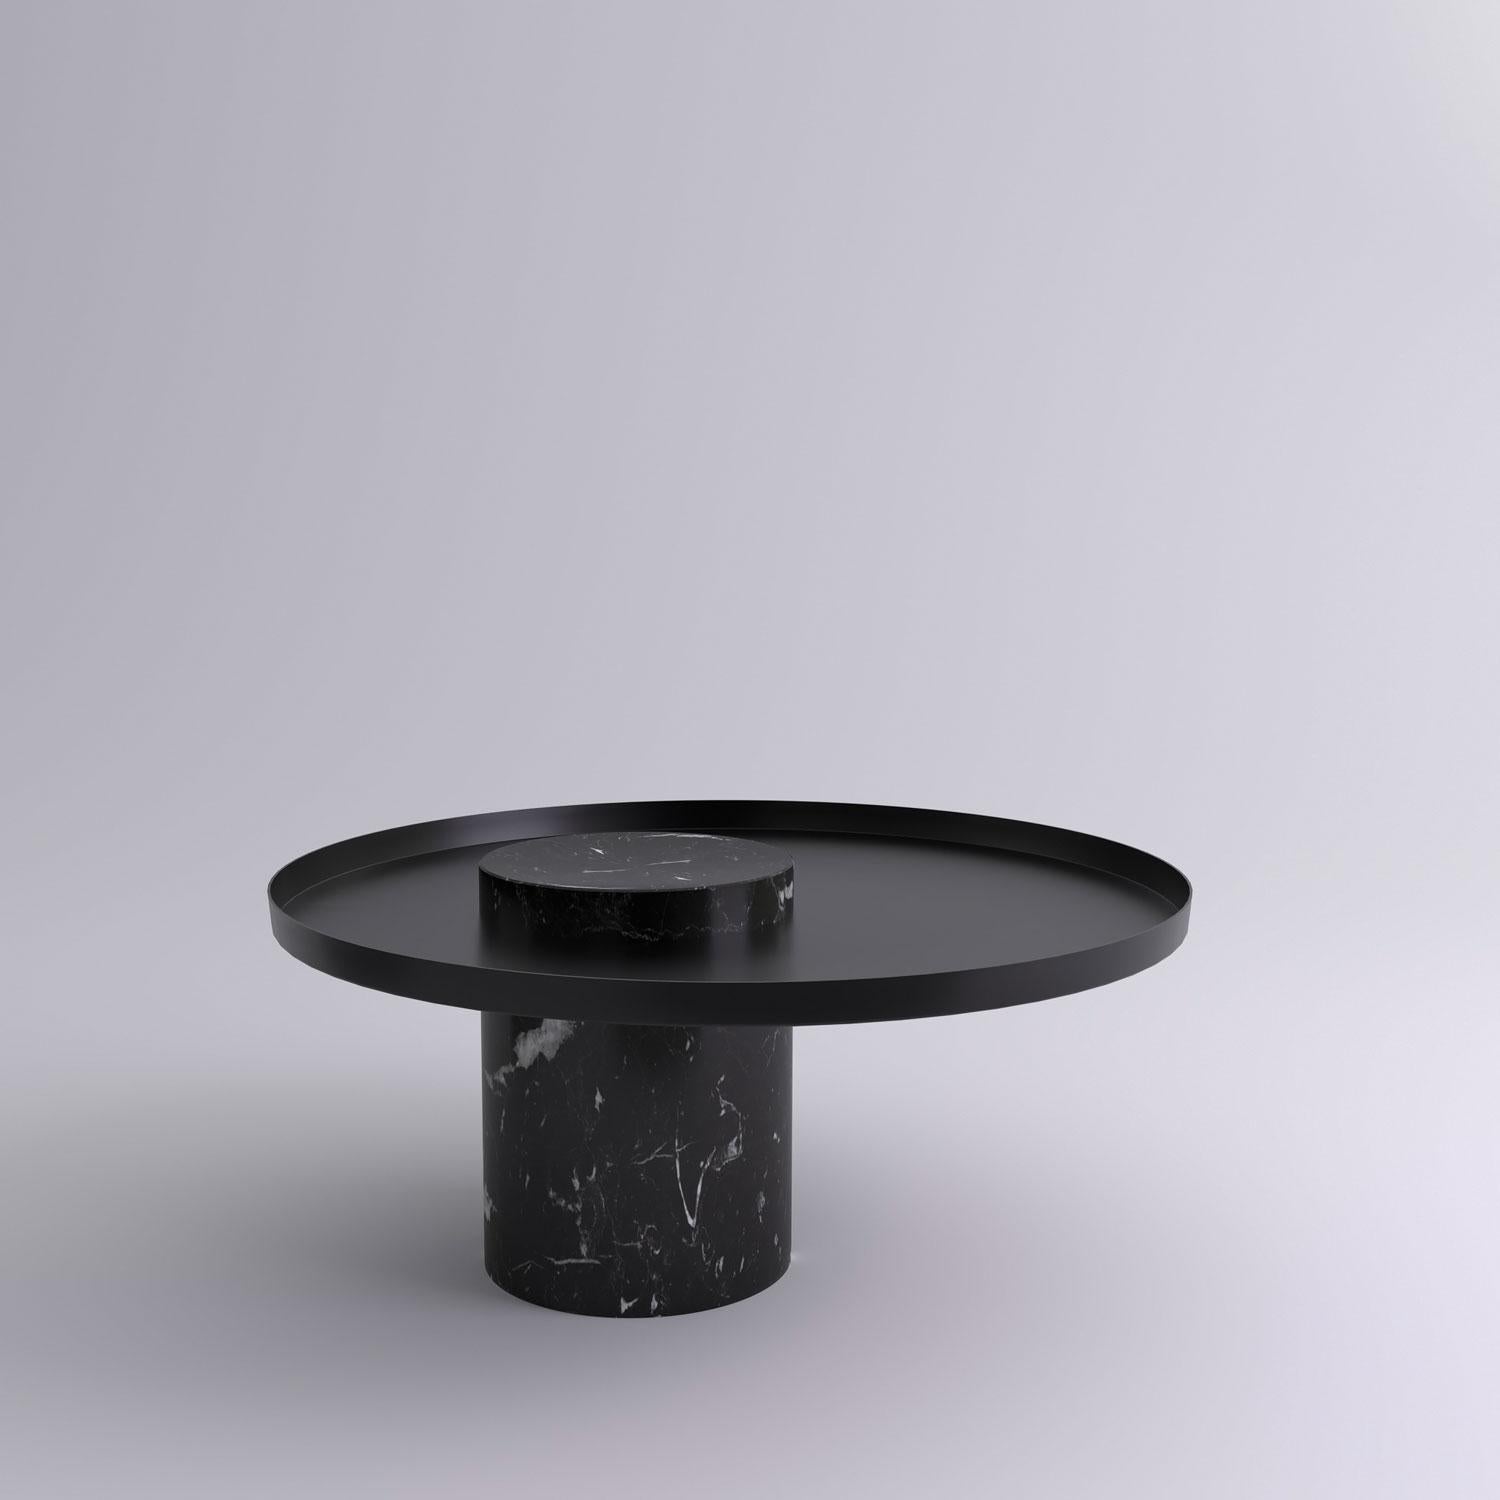 Low black marquina marble contemporary guéridon, Sebastian Herkner
Dimensions: D 70 x H 33 cm
Materials: Black Marquina marble, black metal tray

The salute table exists in 3 sizes, 4 different marble stones for the column and 5 different